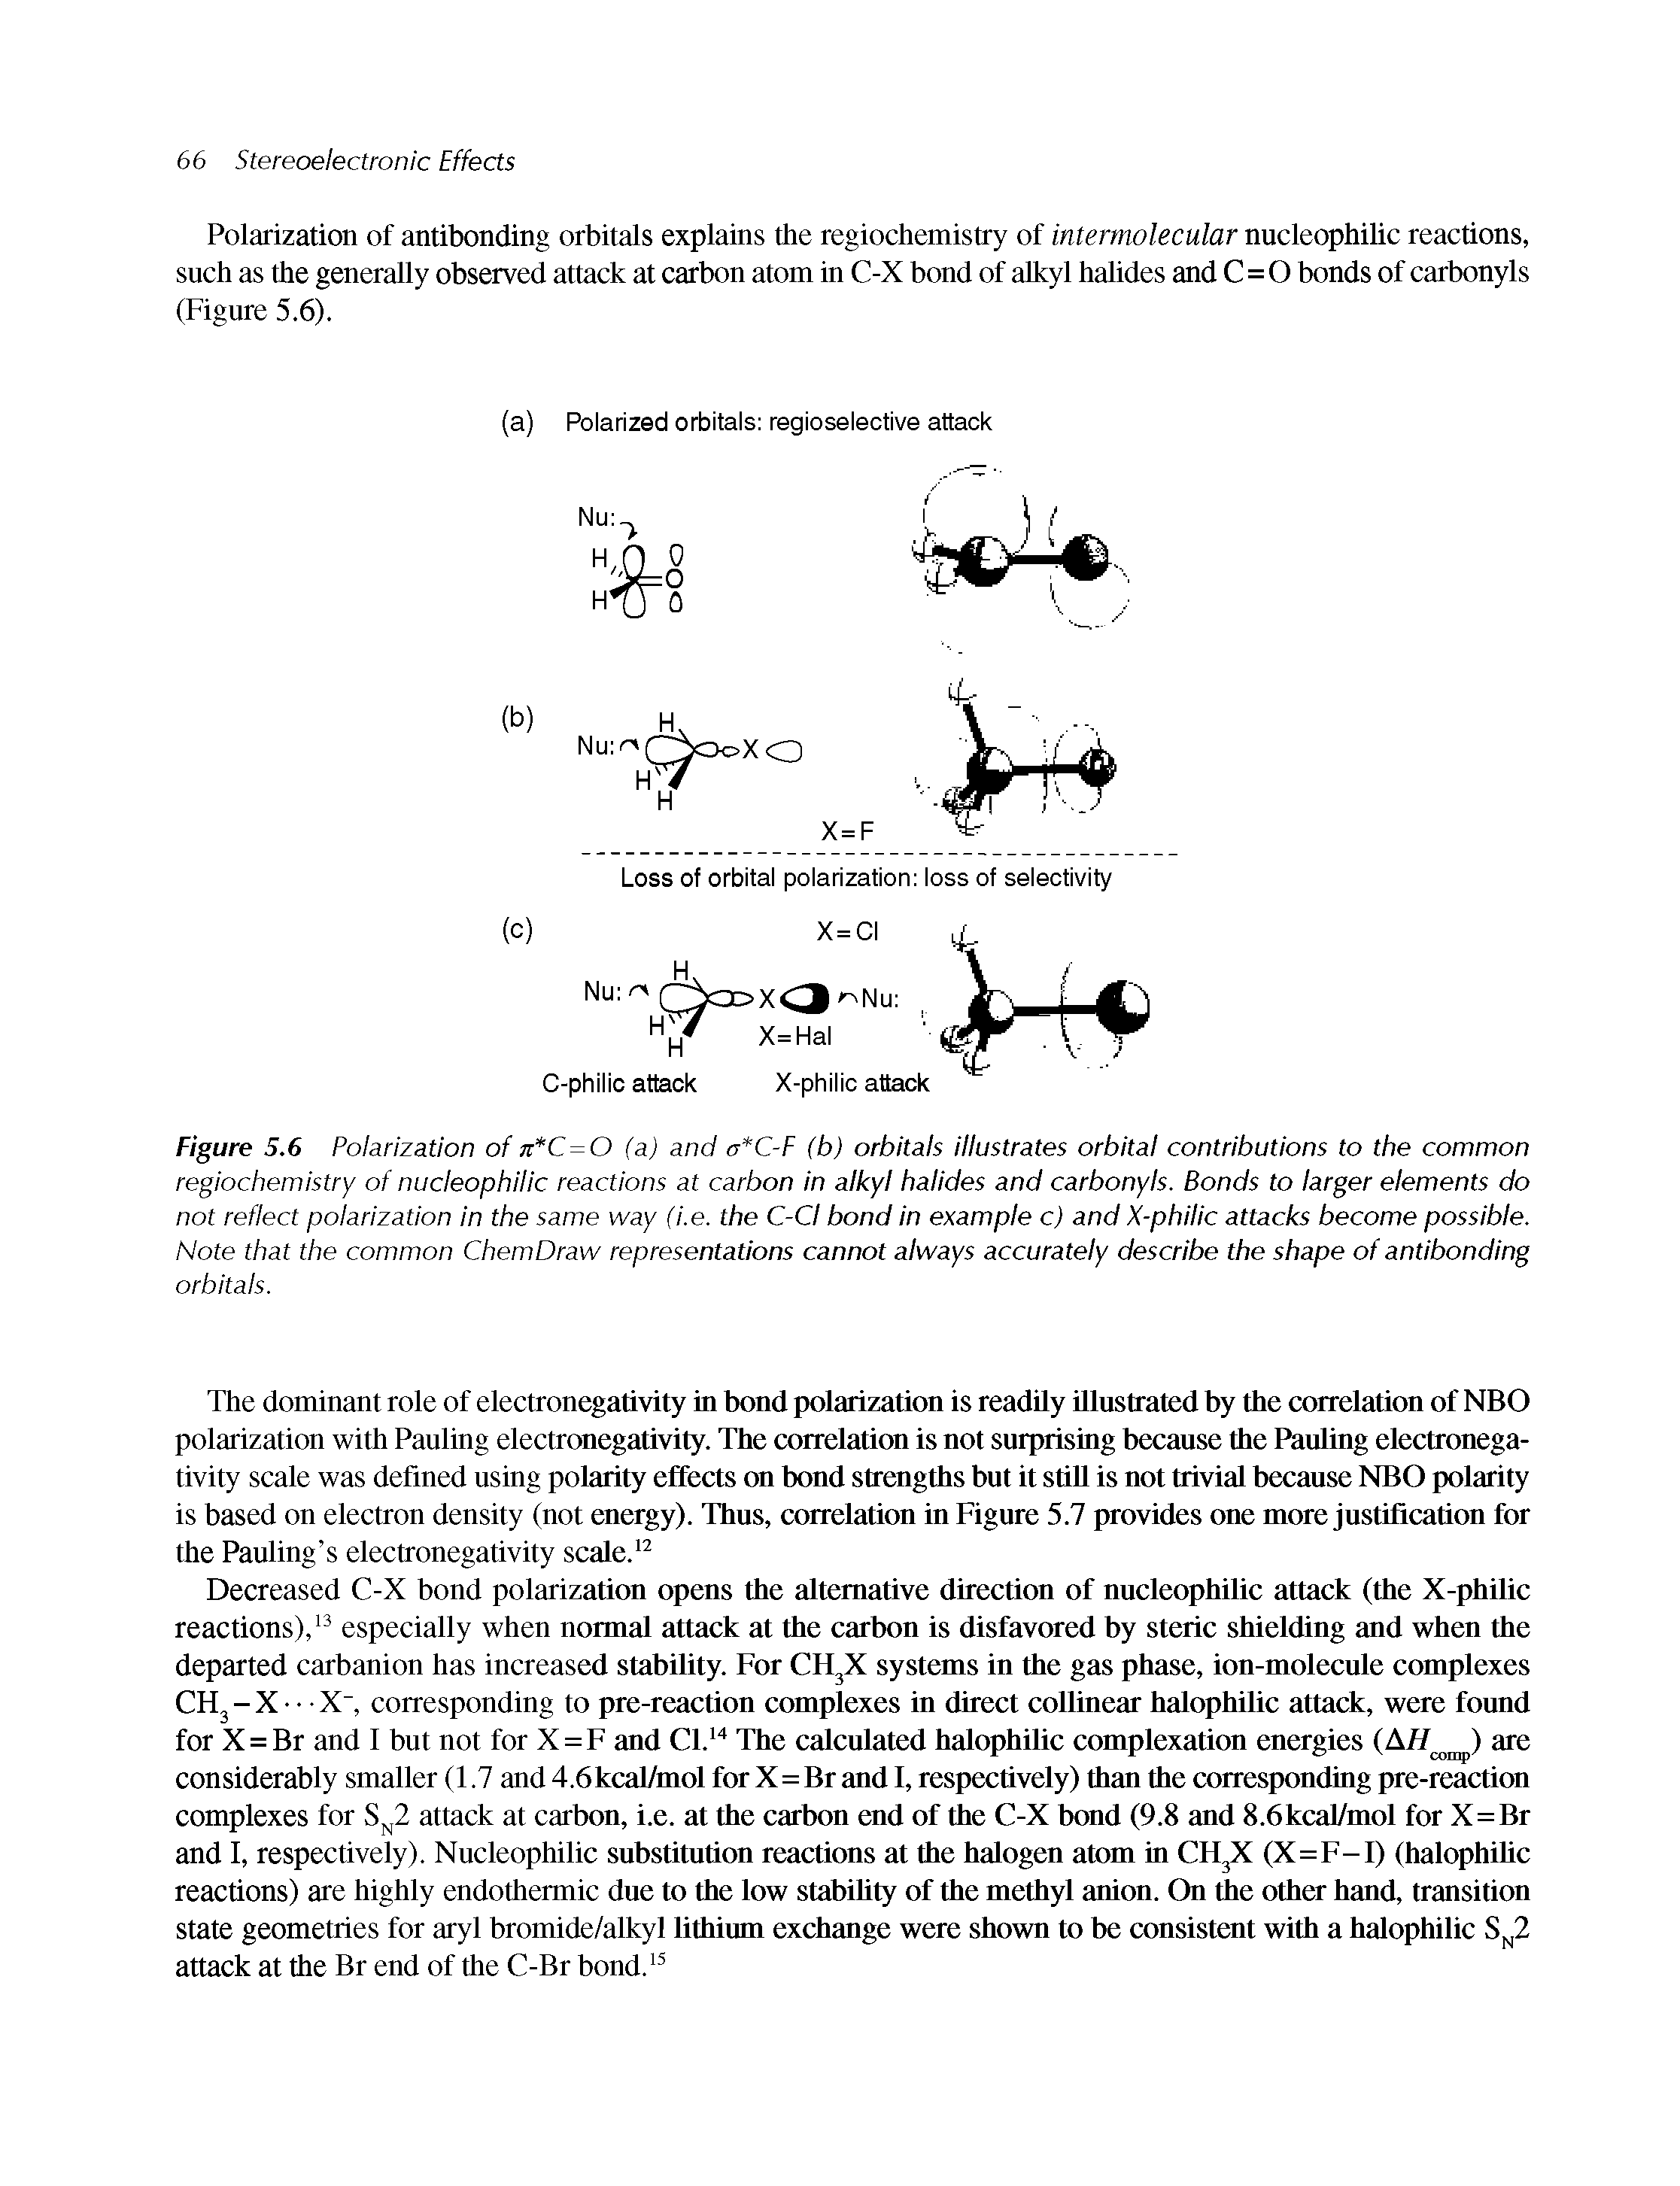 Figure 5.6 Polarization of 7t C=0 (a) and a C-F (b) orbitals illustrates orbital contributions to the common regiochemistry of nucleophilic reactions at carbon in alkyl halides and carbonyls. Bonds to larger elements do not reflect polarization in the same way (i.e. the C-CI bond in example c) and X-philic attacks become possible. Note that the common ChemDraw representations cannot always accurately describe the shape of antibonding...